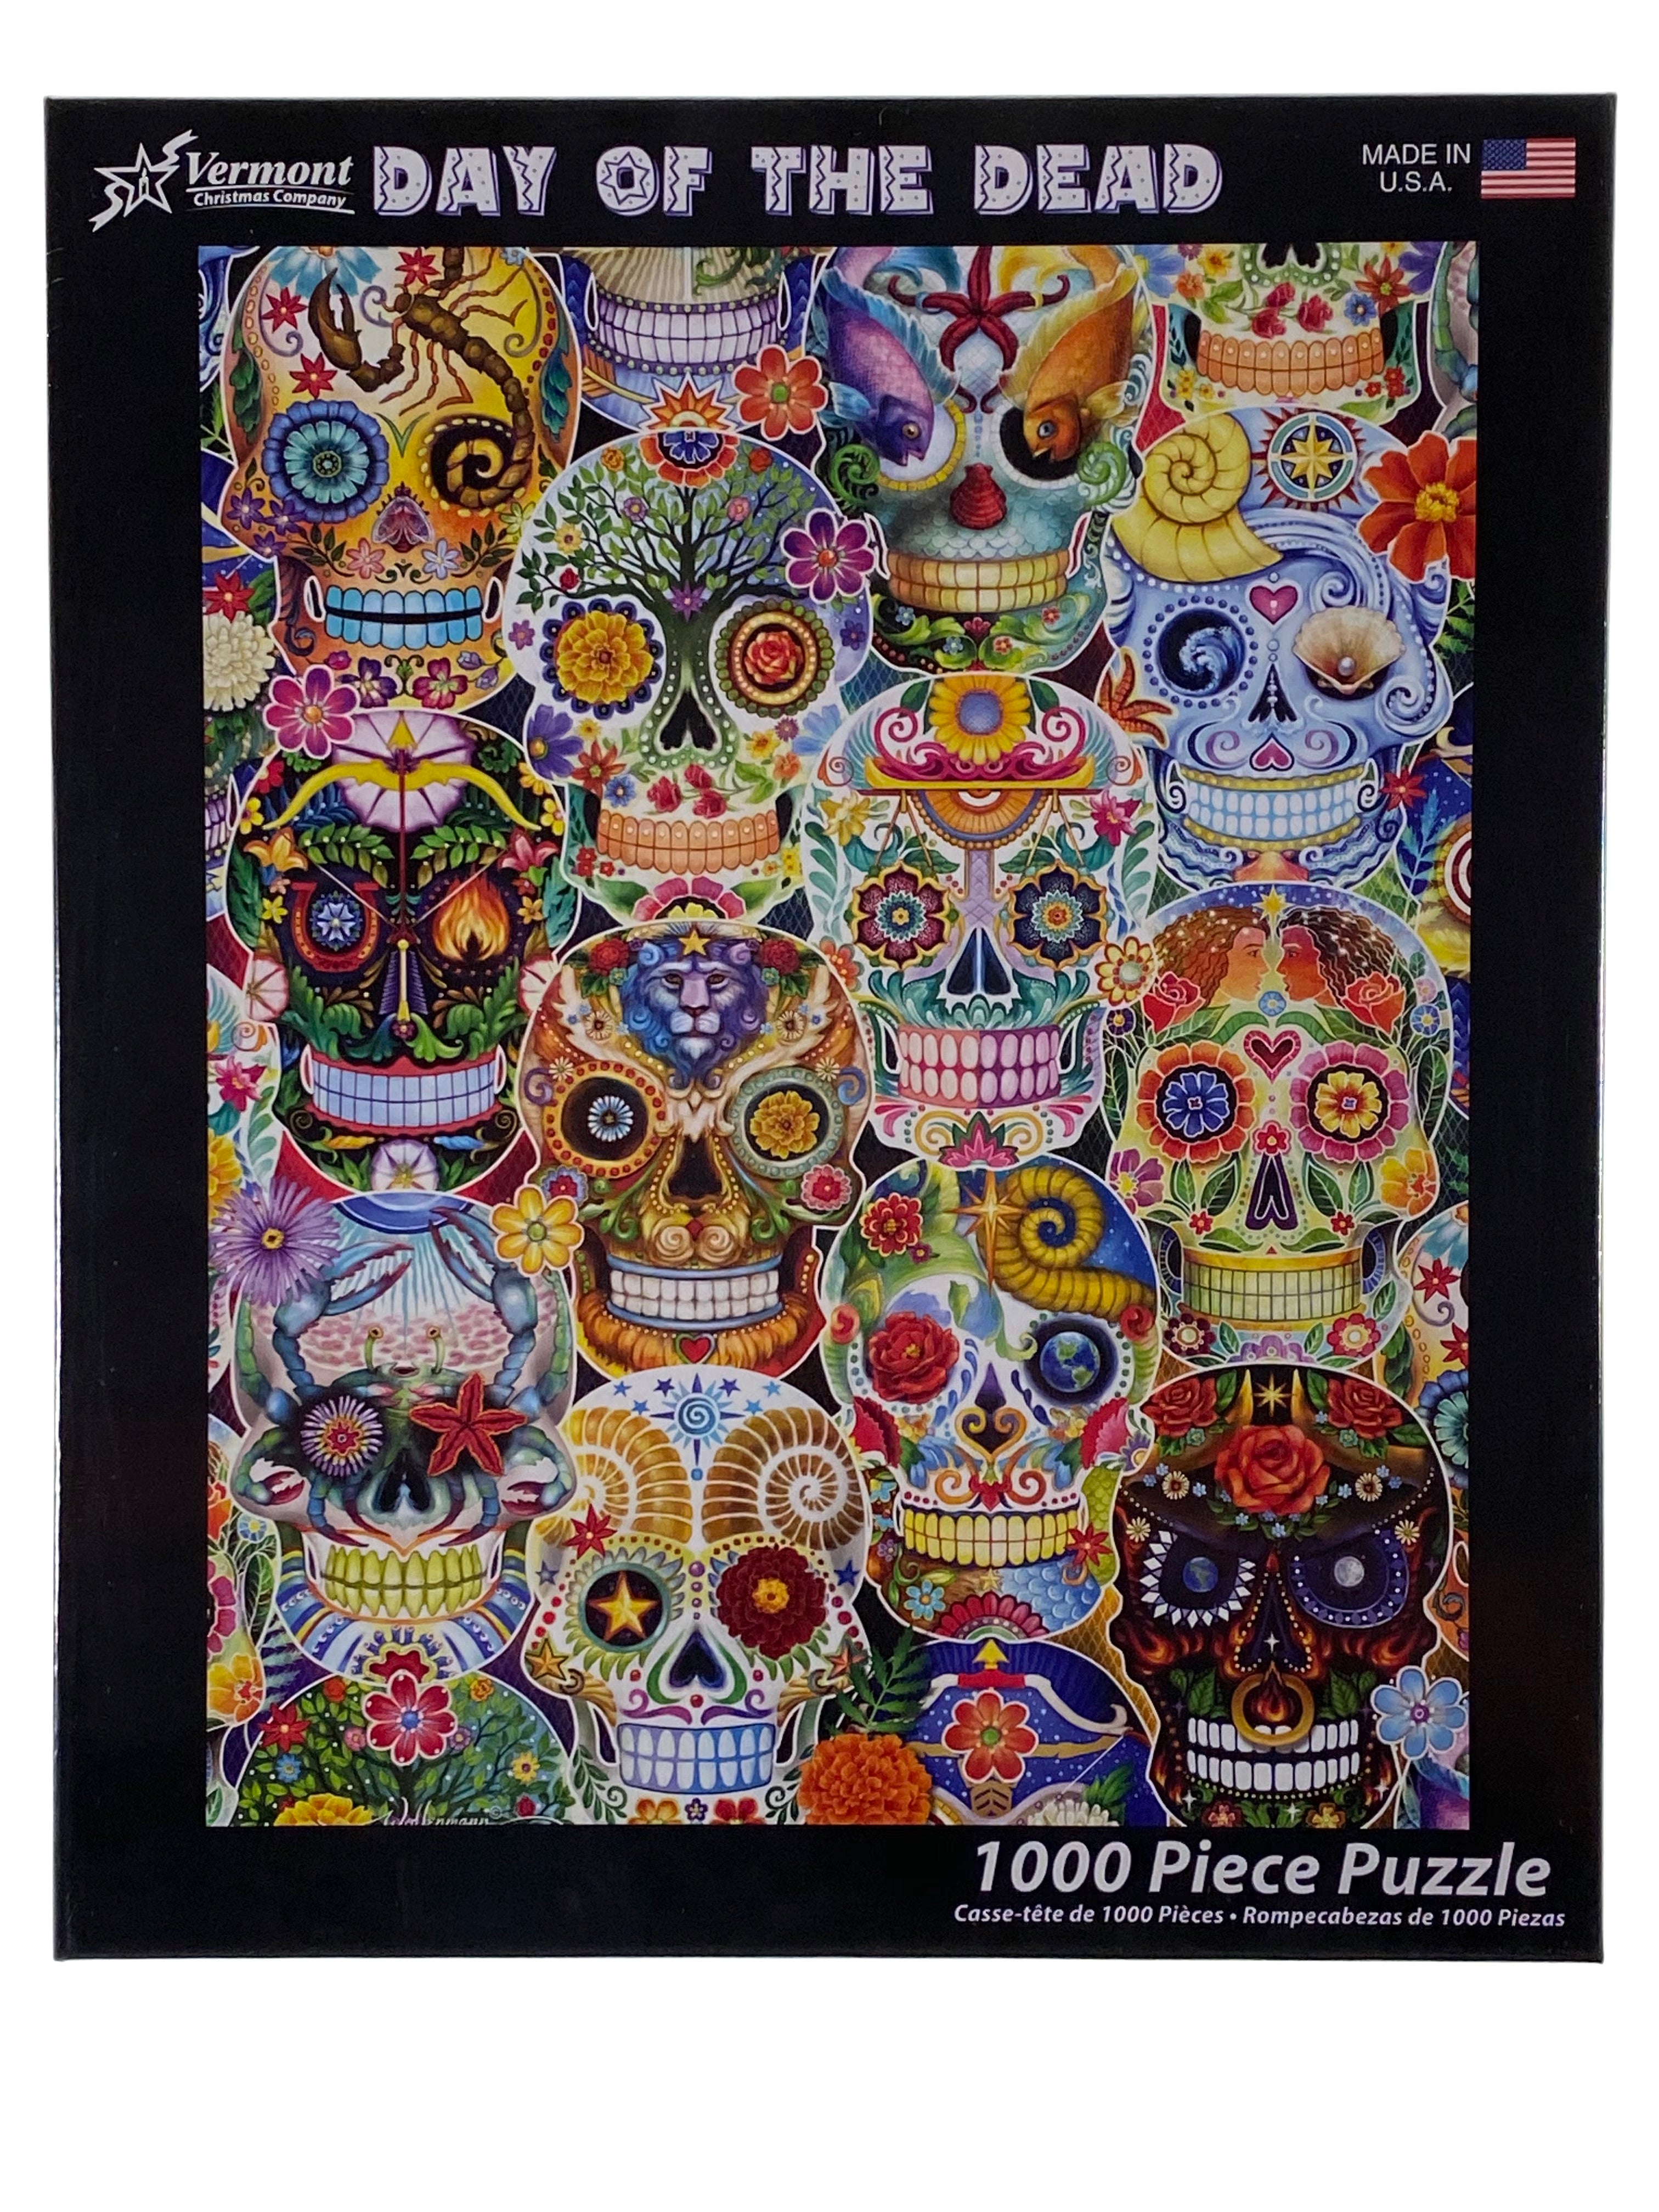 Day Of The Dead 1000 Piece Puzzle    